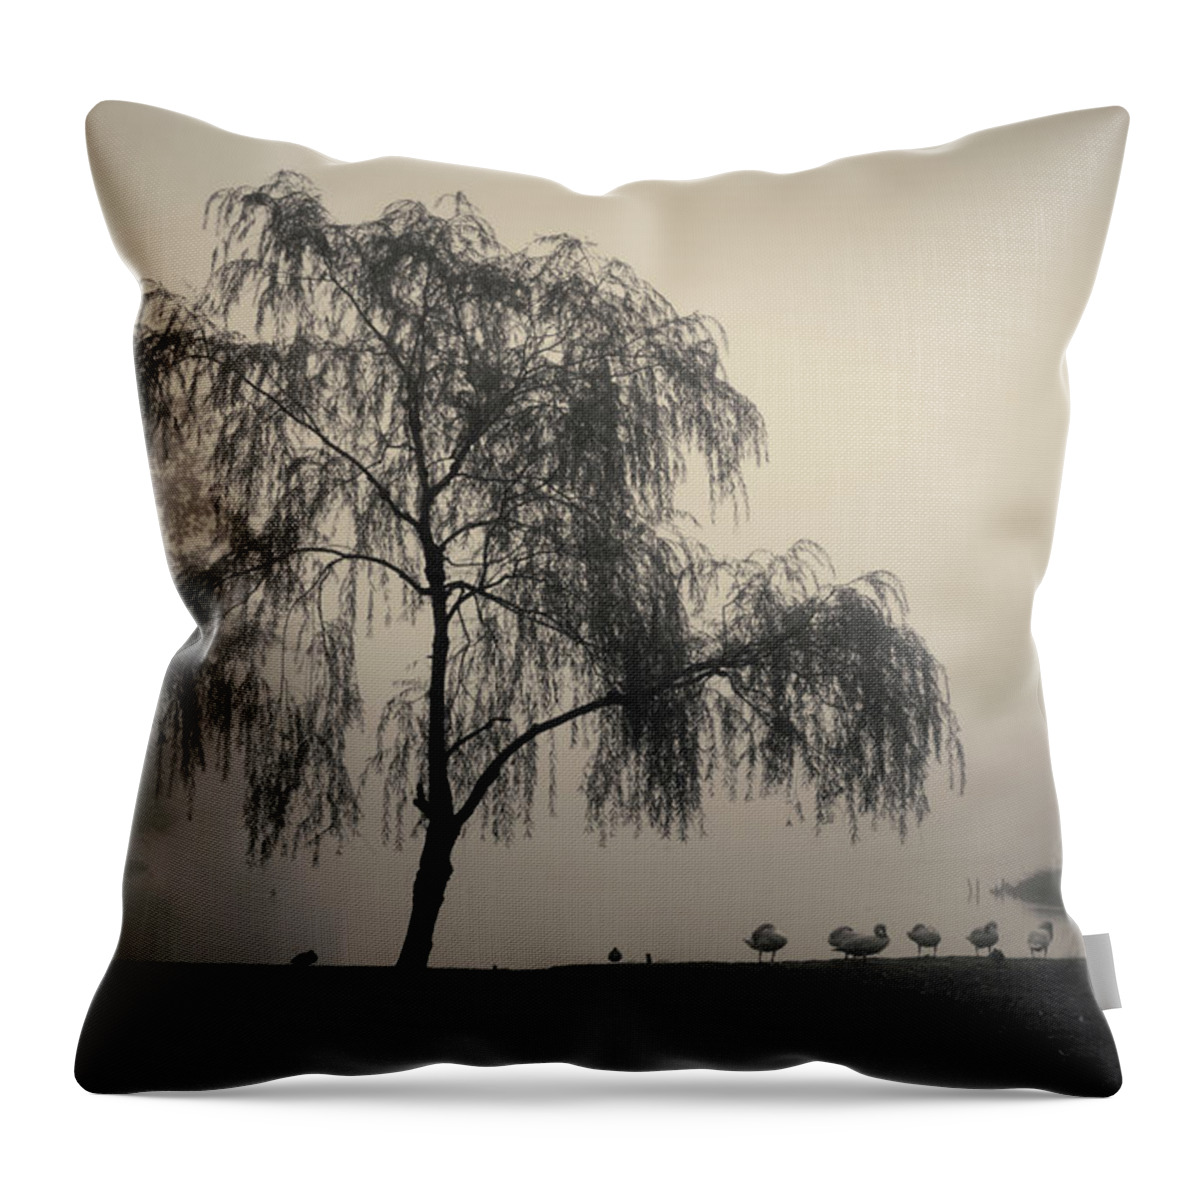 Slater Throw Pillow featuring the photograph Slater Park Landscape No. 1 by David Gordon